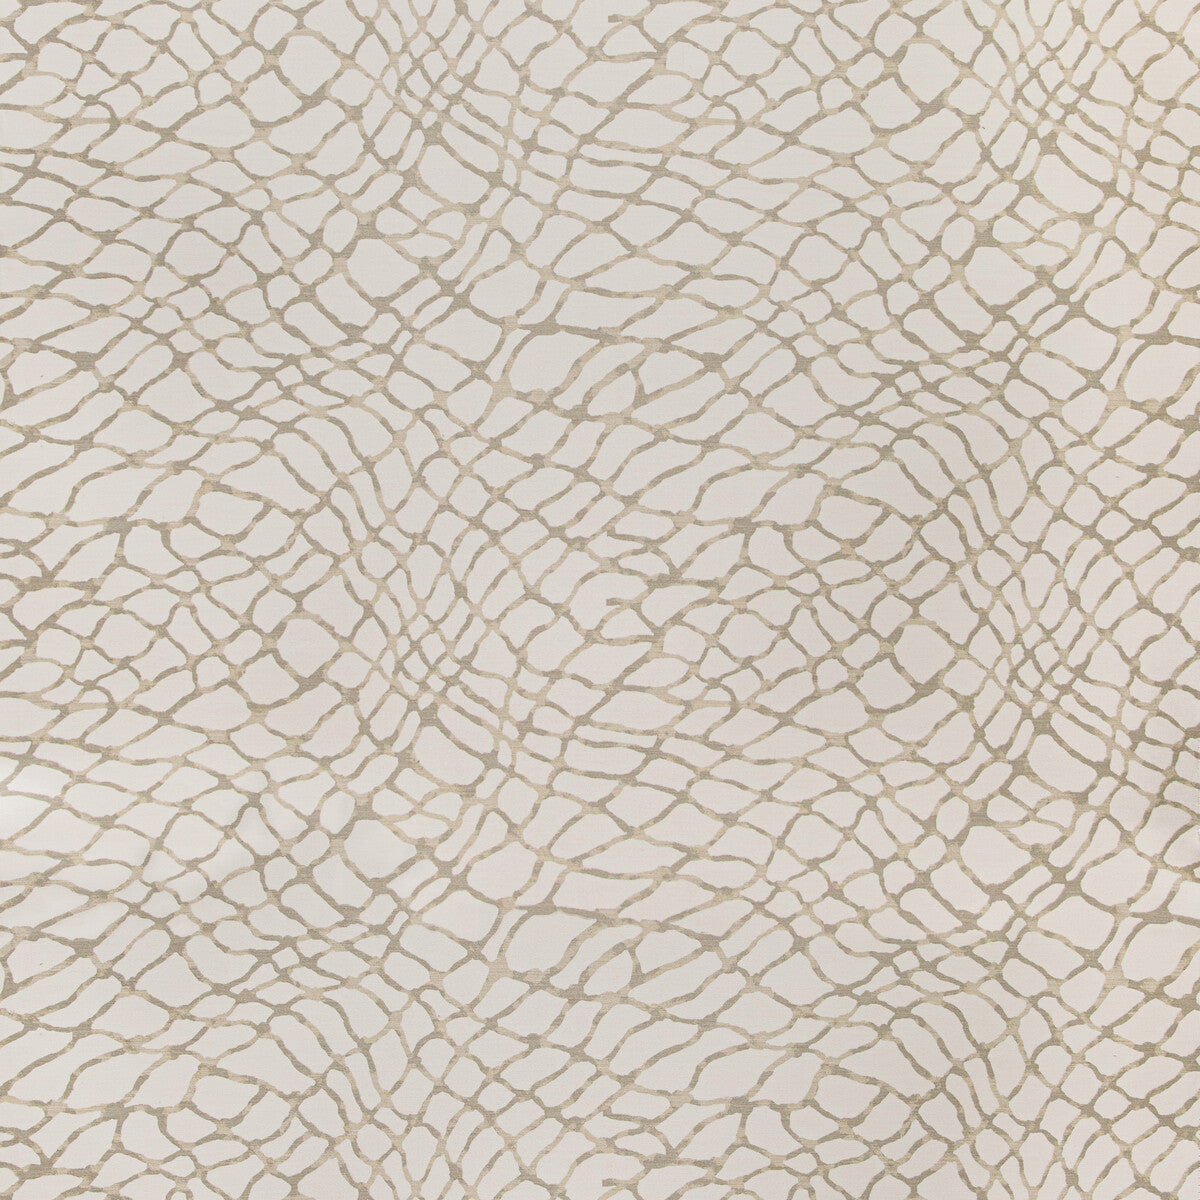 Hawser fabric in dune color - pattern 35819.16.0 - by Kravet Design in the Indoor / Outdoor collection